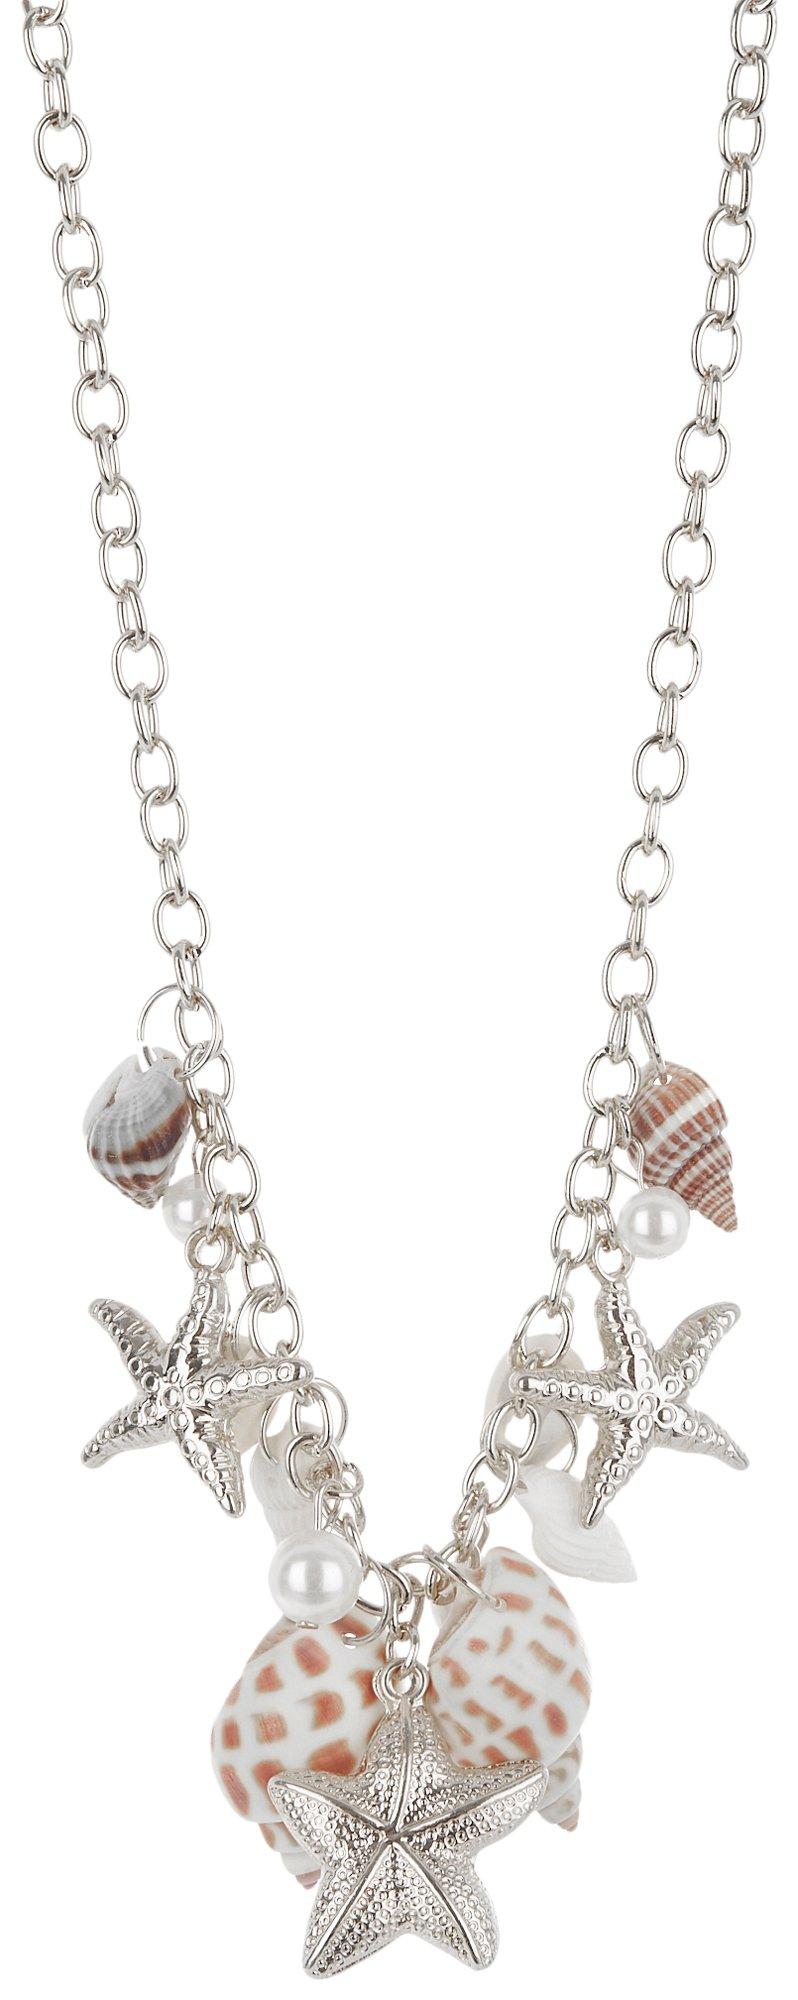 Beach Chic Shells & Starfish Charms Necklace